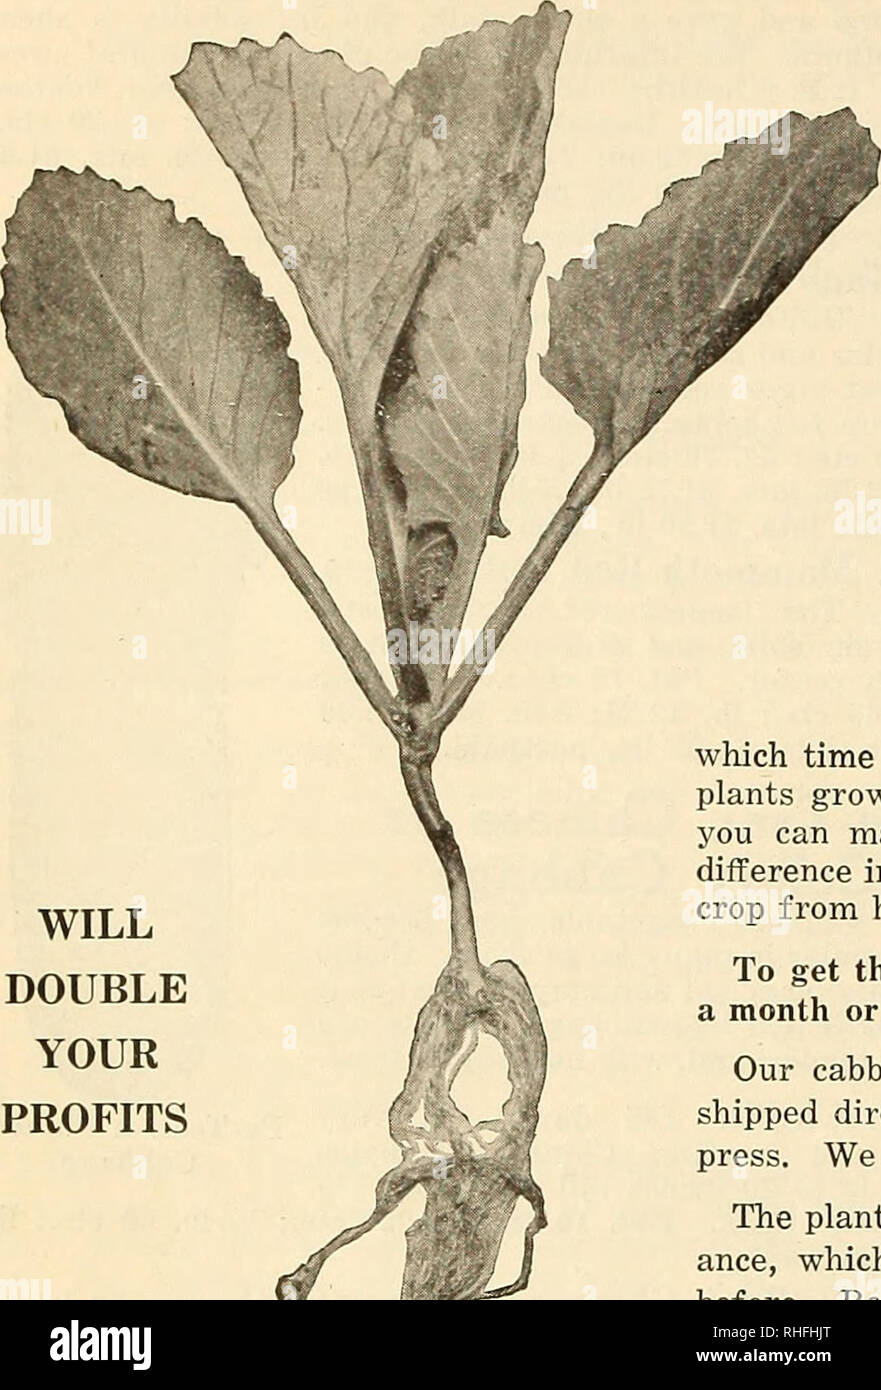 . Bolgiano's capitol city seeds : seeds that succeed. Nurseries (Horticulture) Catalogs; Bulbs (Plants) Catalogs; Vegetables Catalogs; Garden tools Catalogs; Seeds Catalogs; Flowers Catalogs; Poultry Equipment and supplies Catalogs. 12 F. W. BOLGIANO &amp; CO., INC., Washington, D. C. FROST PROOF CABBAGE PLANTS READY FOR IMMEDIATE DELIVERY Mature Heads Two to Three Weeks Earlier Than Your Home-Grown Plants In the famous Sea Island Cotton growing region of South Carolina there is found a soil and climatic conditions just suited for growing tough hardy cabbage plants during the Winter and early  Stock Photo